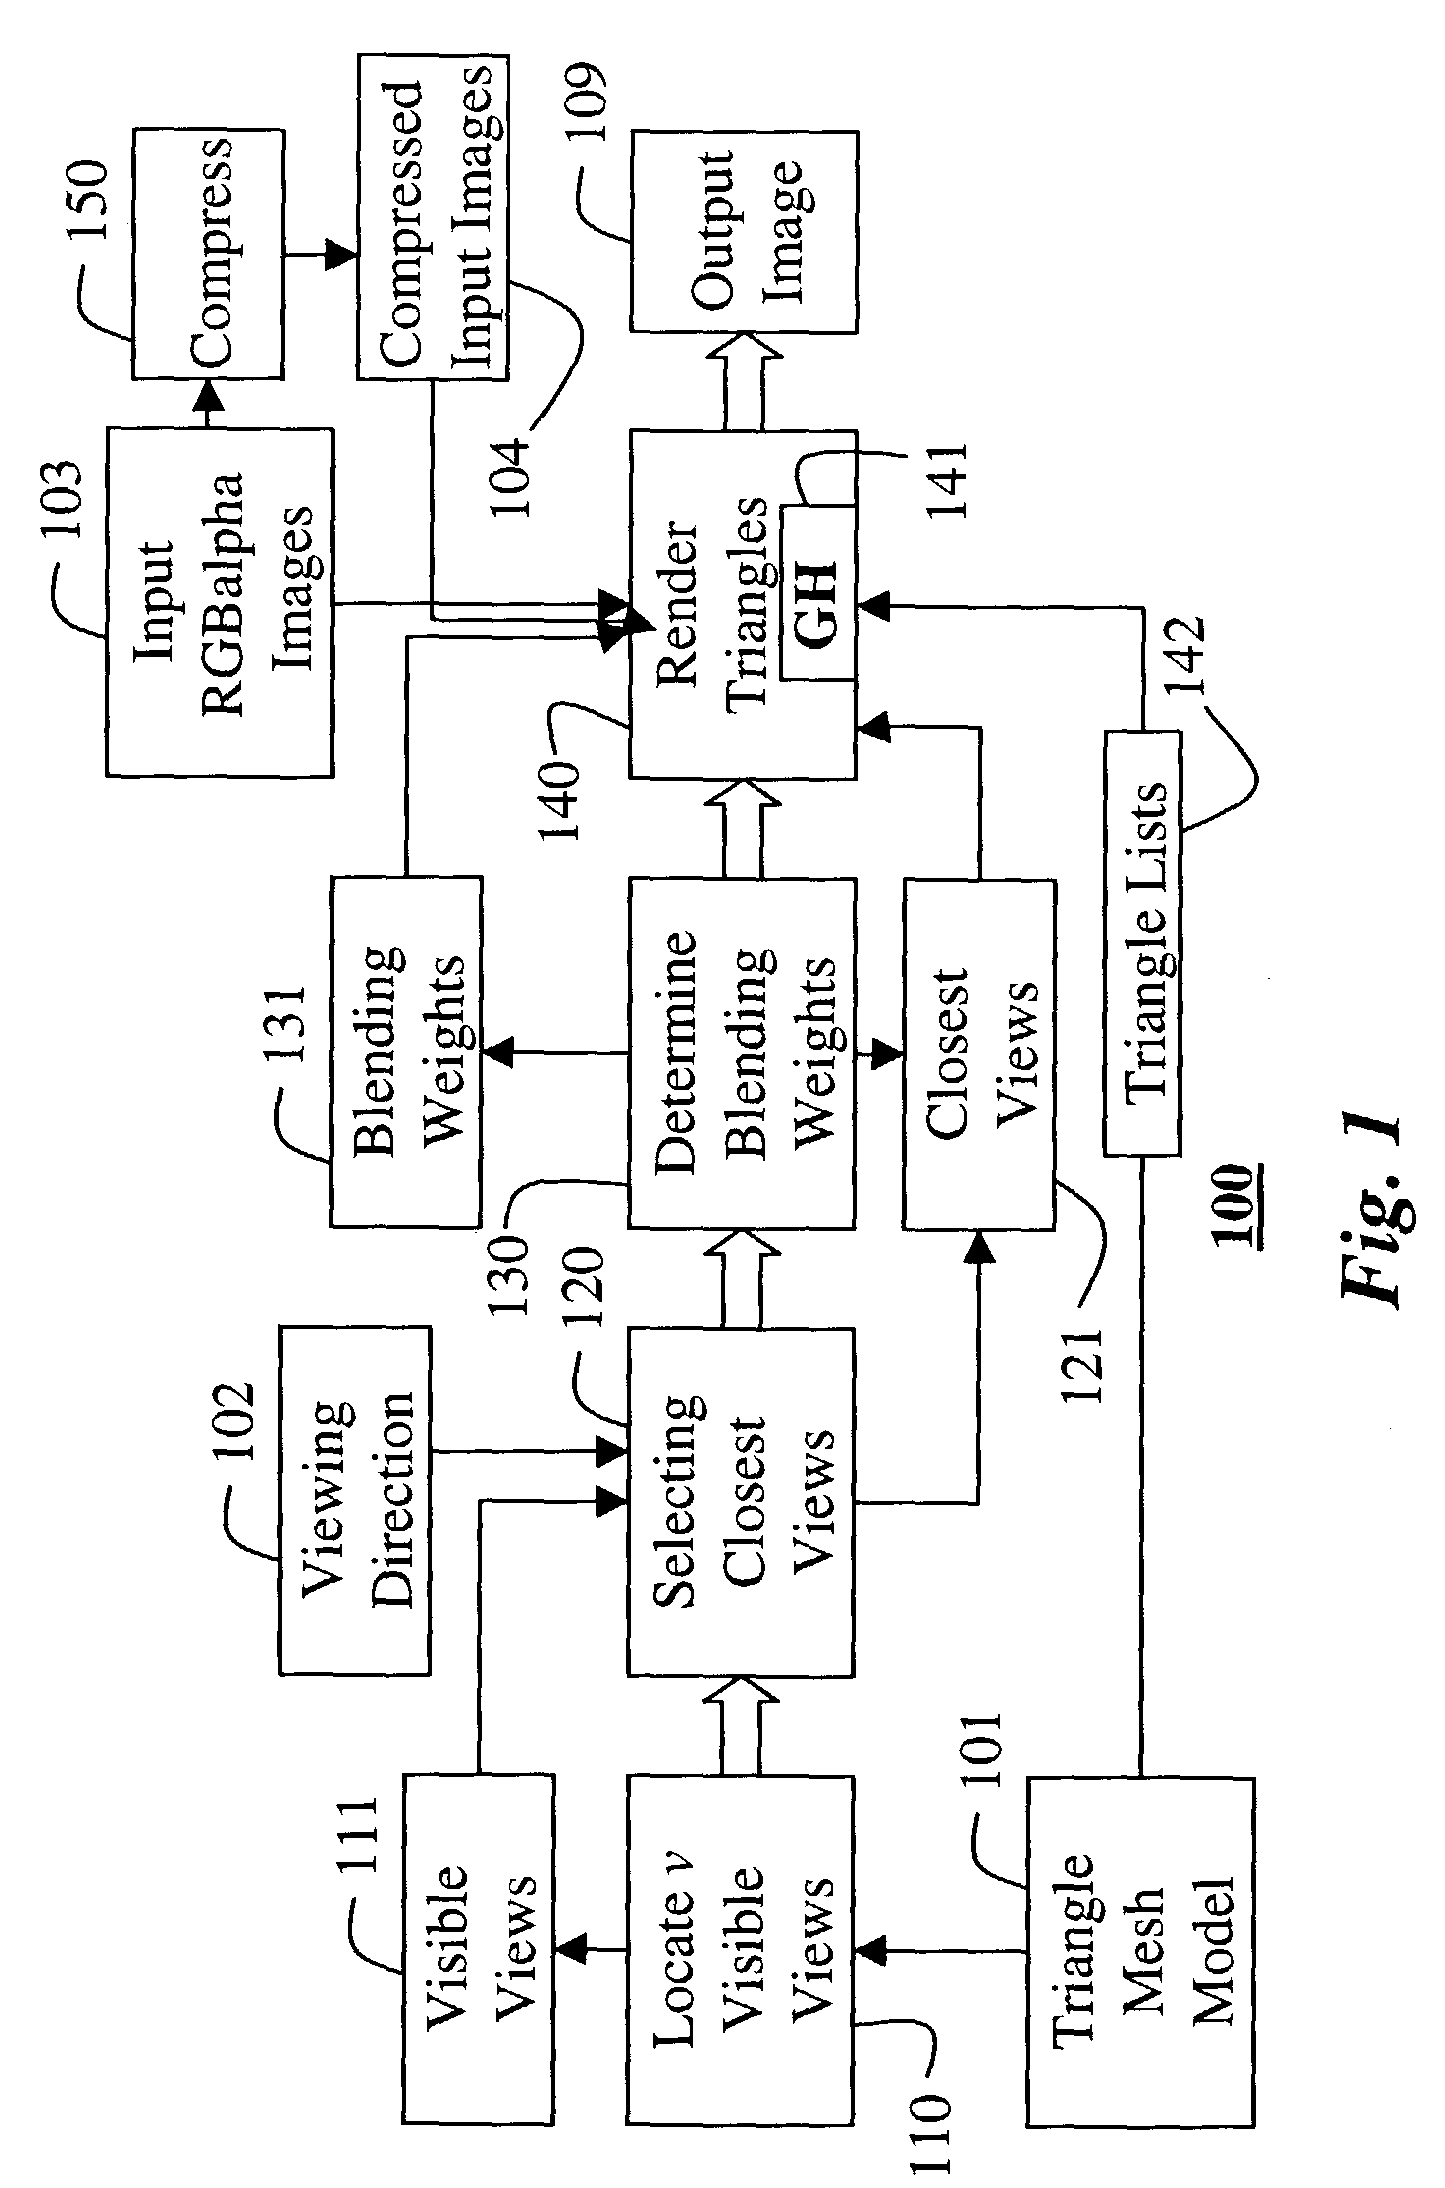 System and method for interactively rendering objects with surface light fields and view-dependent opacity